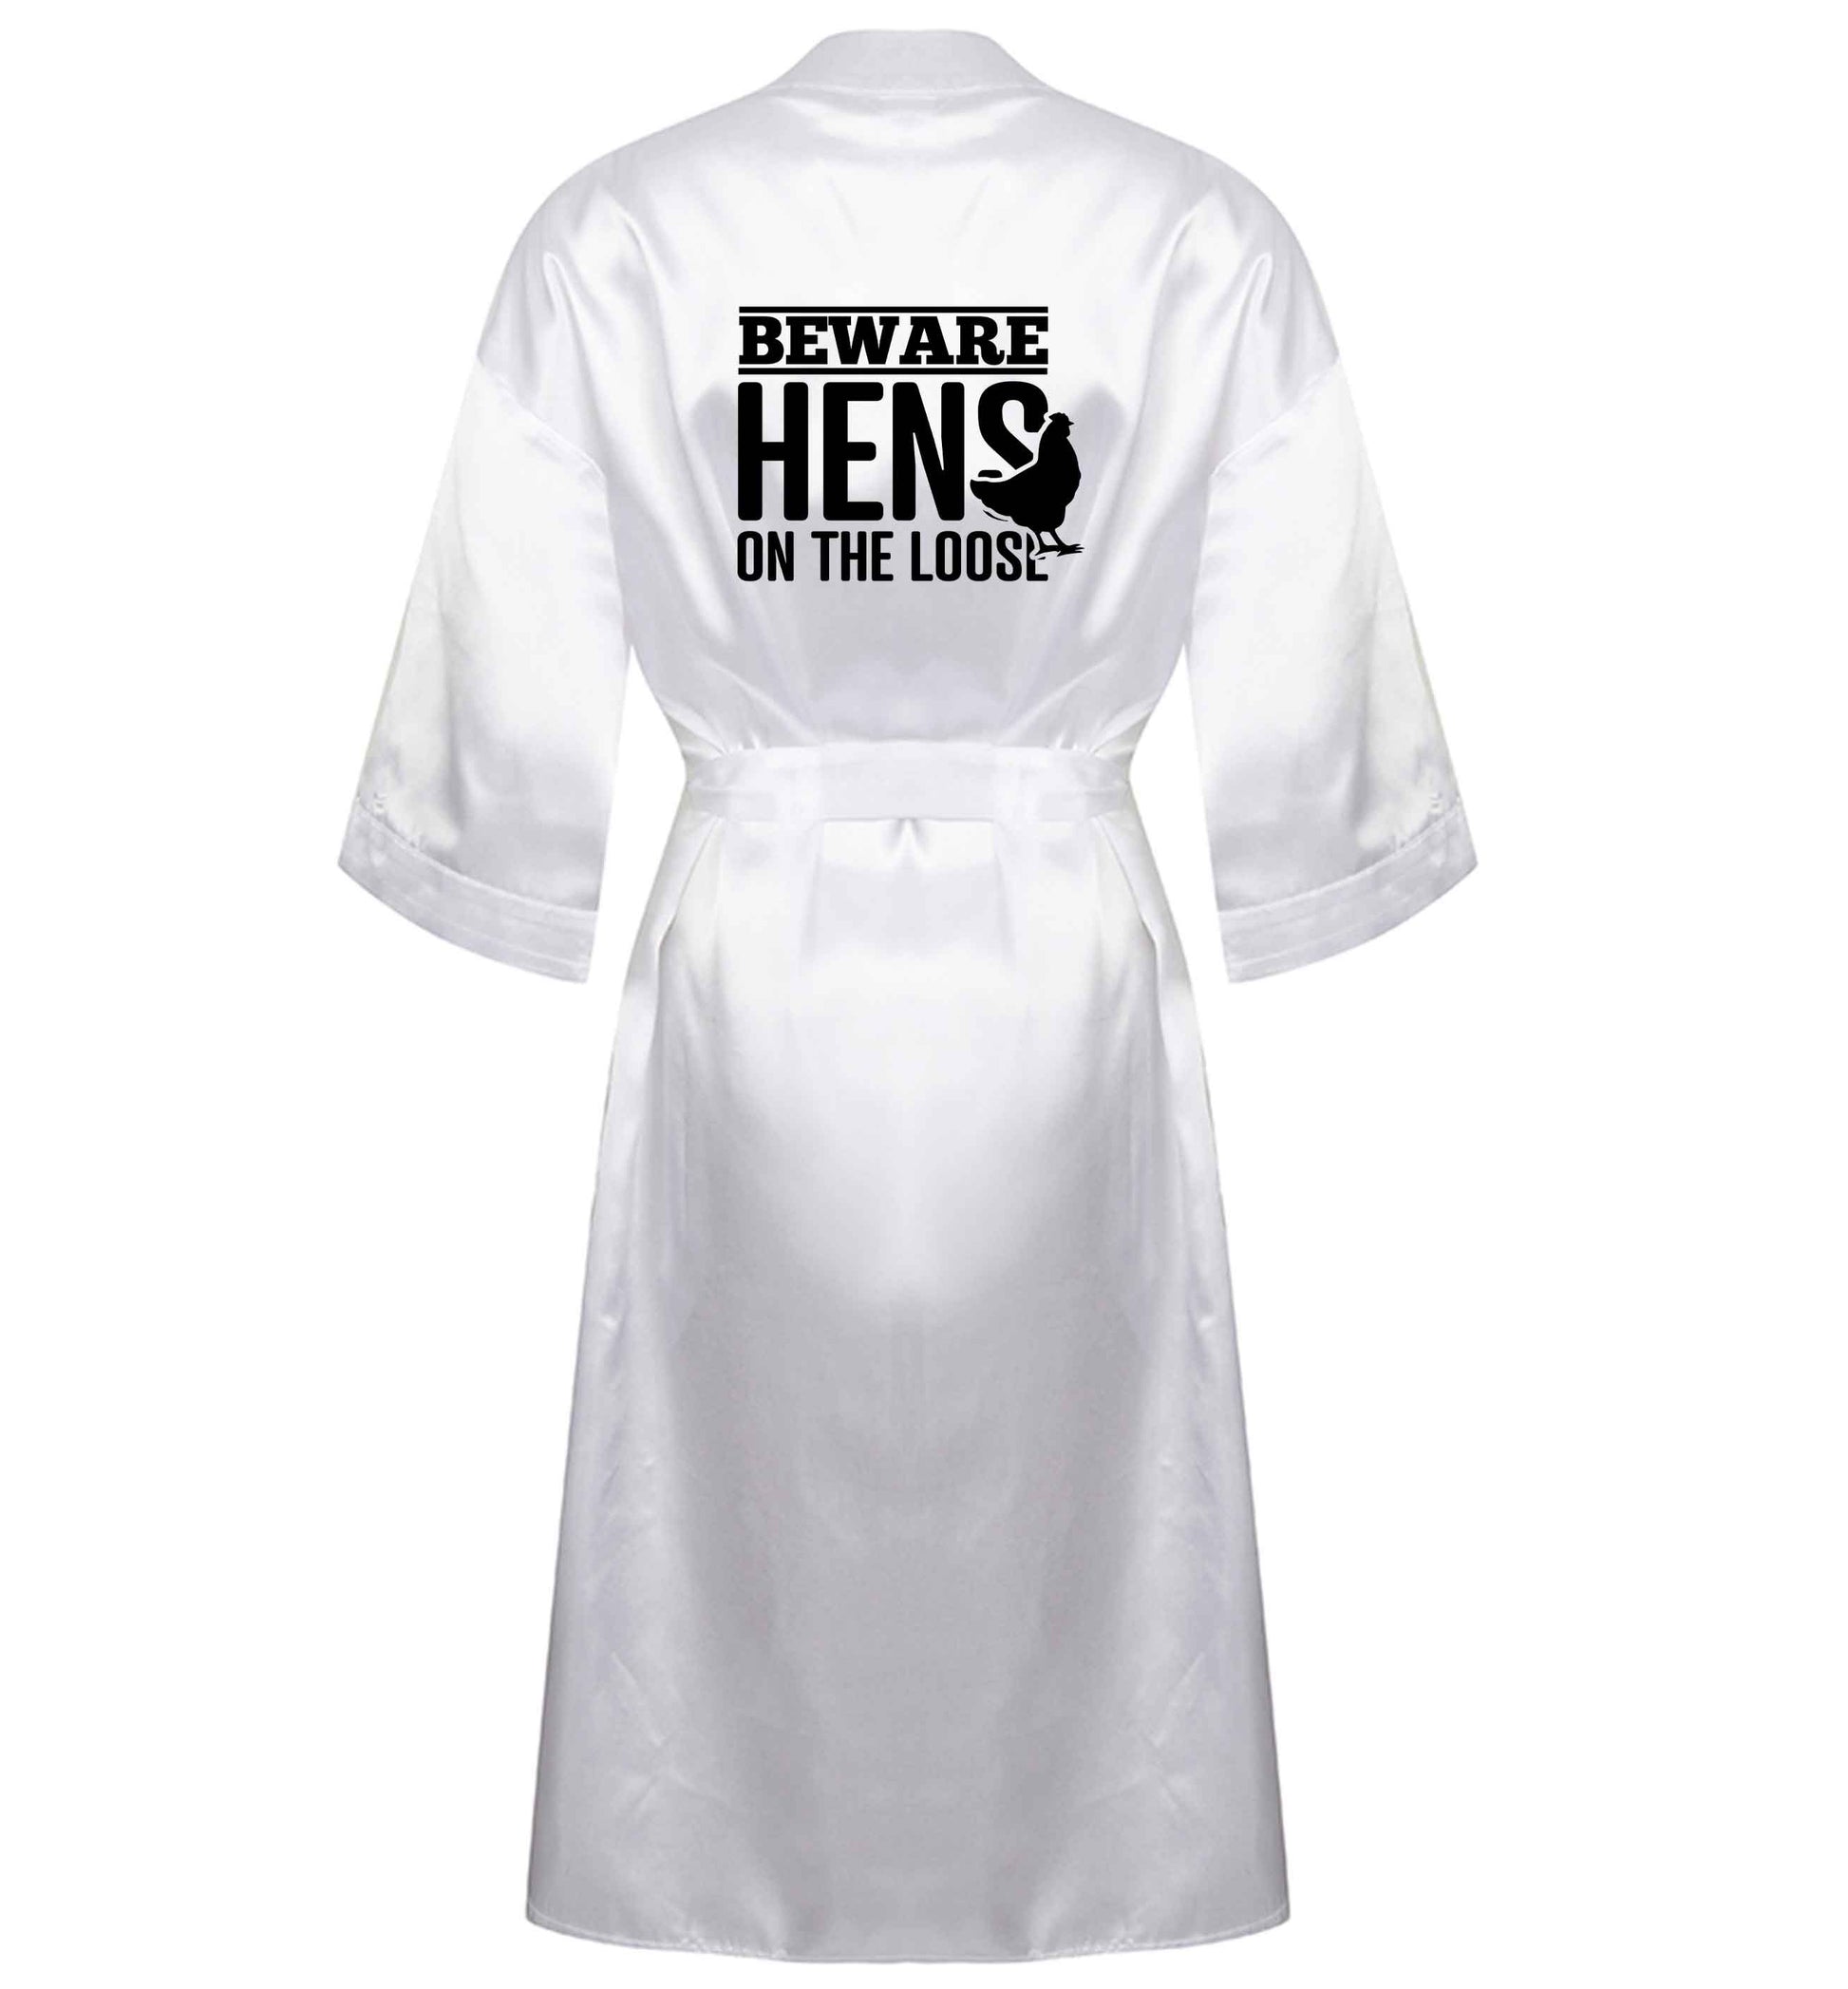 Beware hens on the loose XL/XXL white ladies dressing gown size 16/18